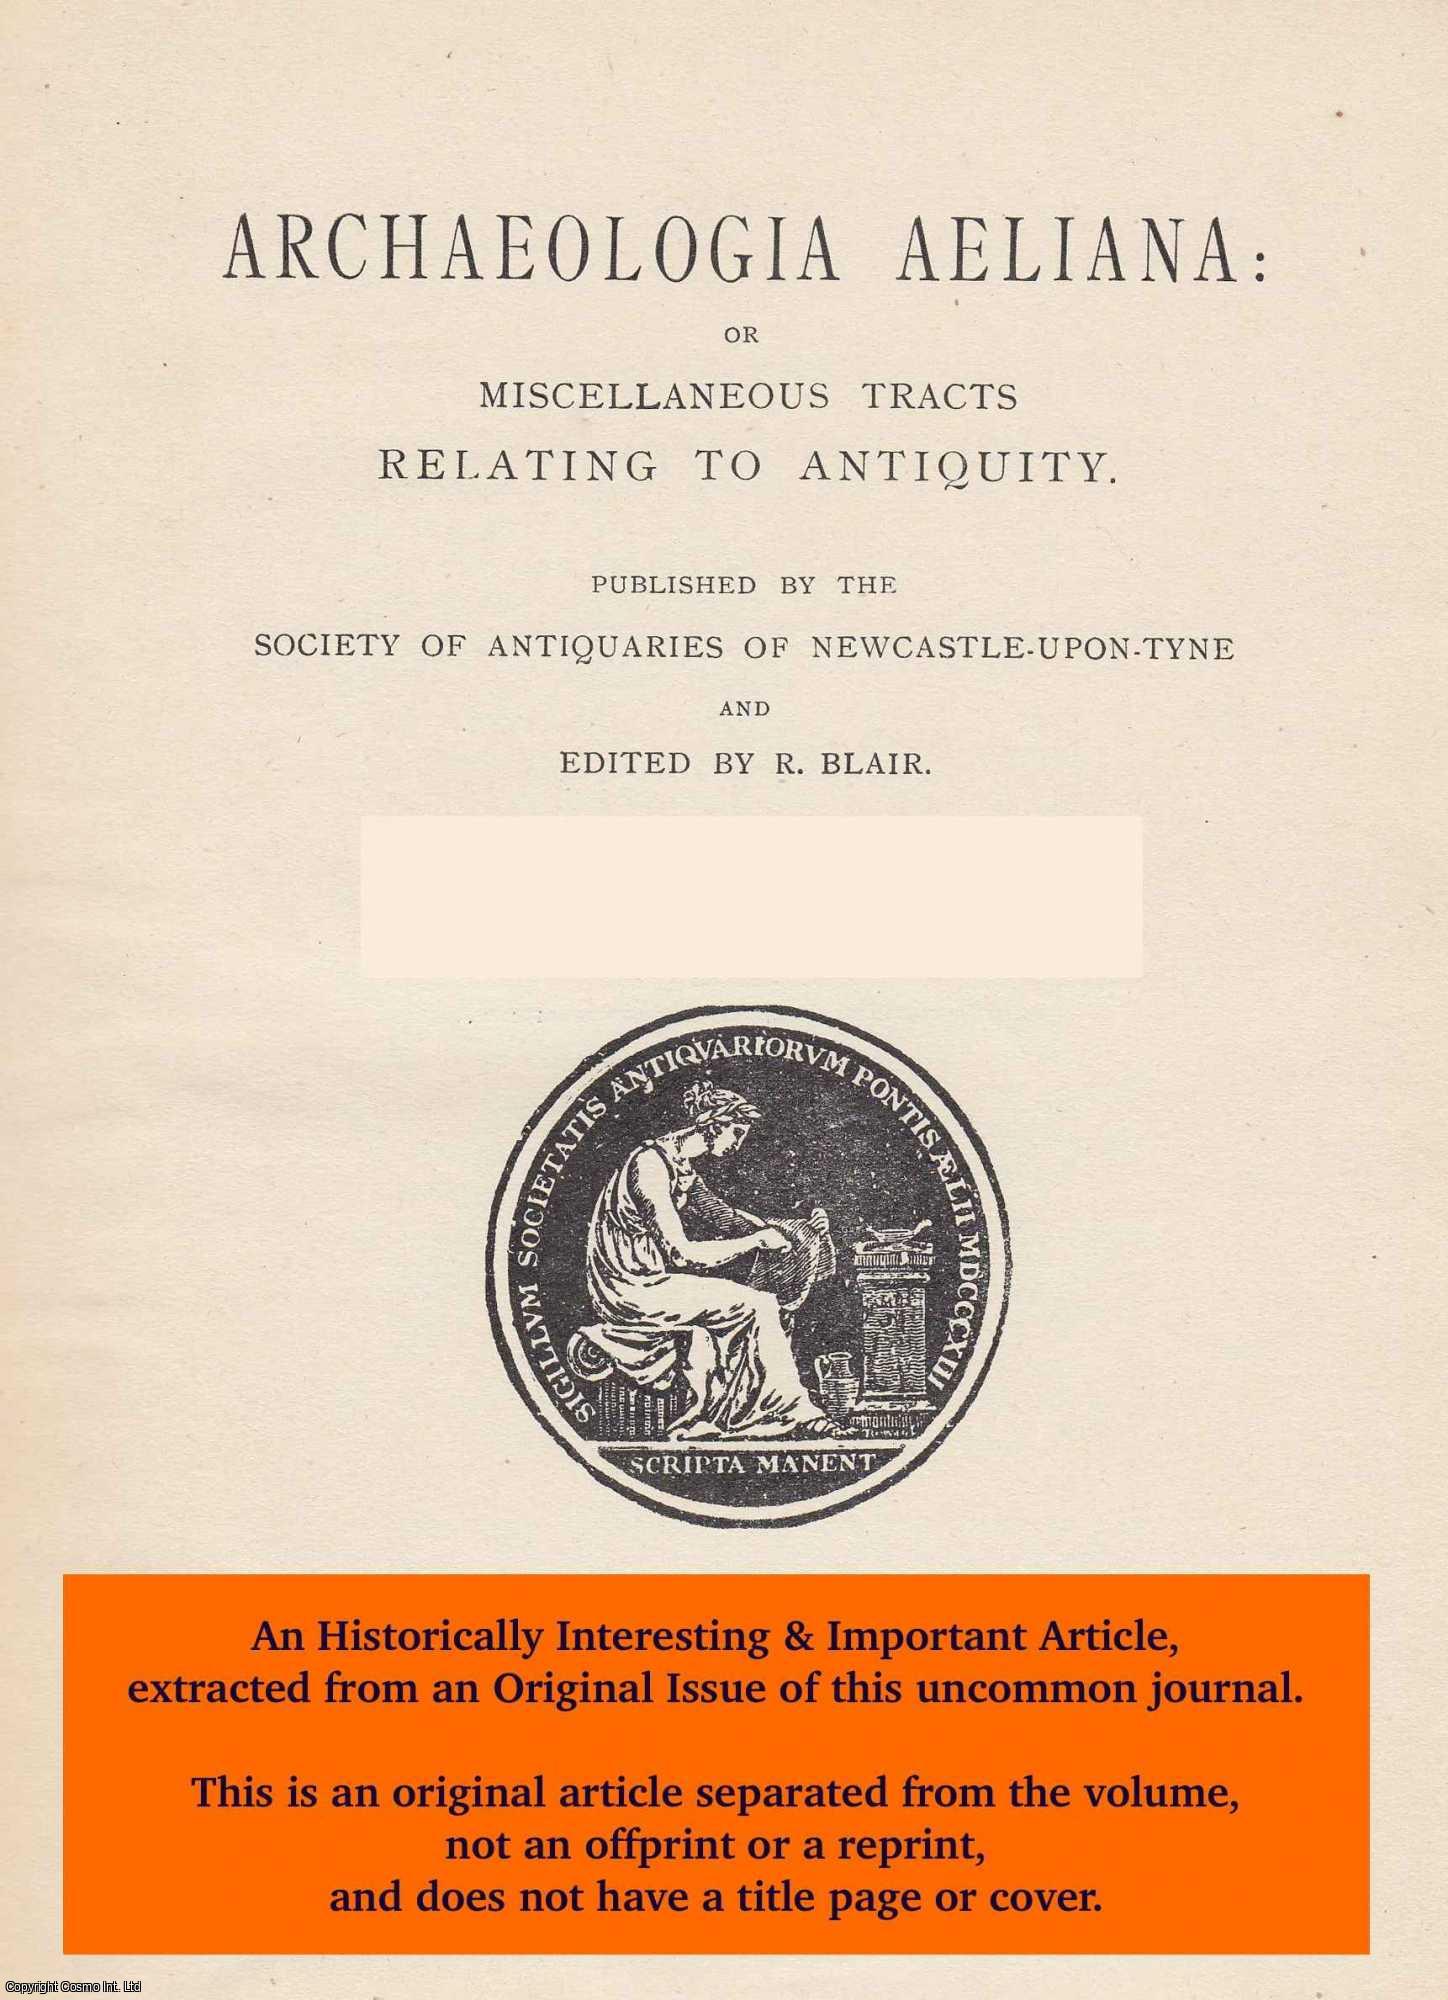 C. Roy Hudlestone - Fenwick and Ramsay. An original article from The Archaeologia Aeliana: or Miscellaneous Tracts Relating to Antiquity, 1957.